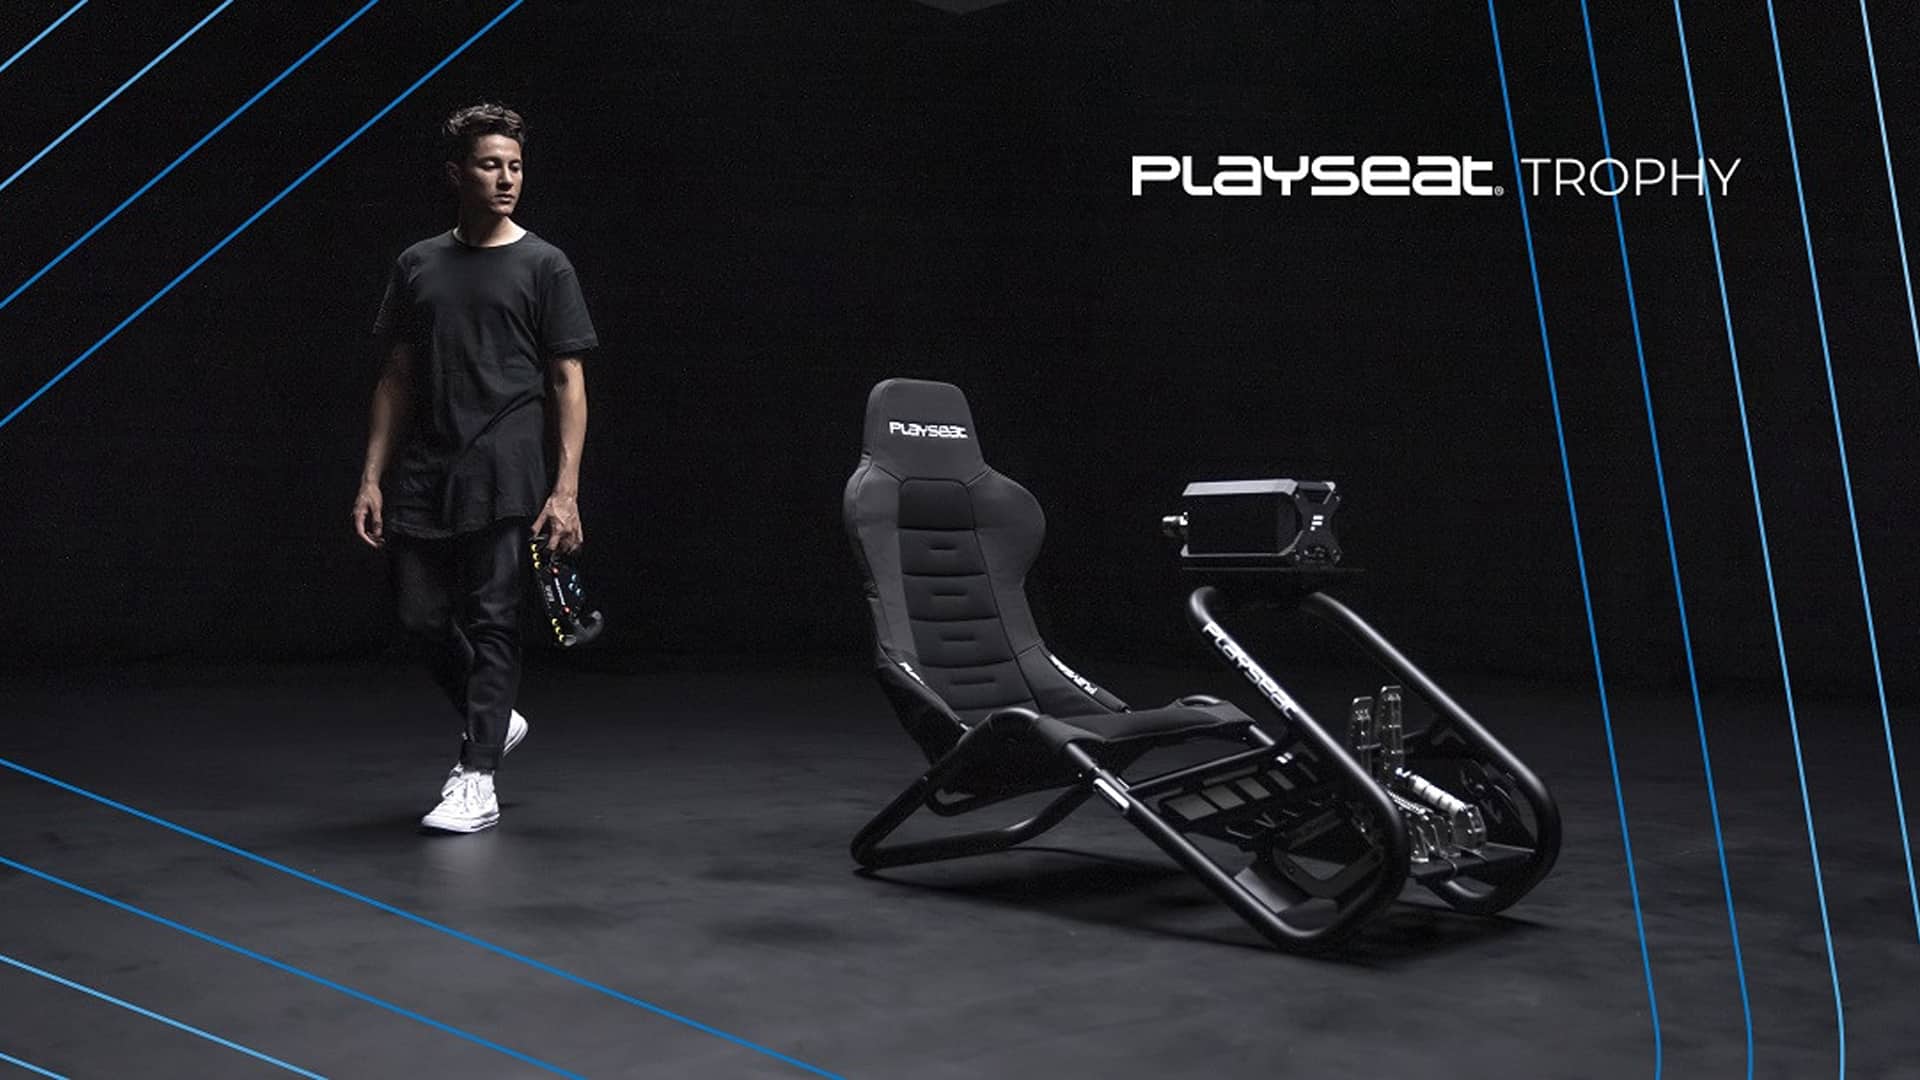 Playseat Trophy racing seat launches in November